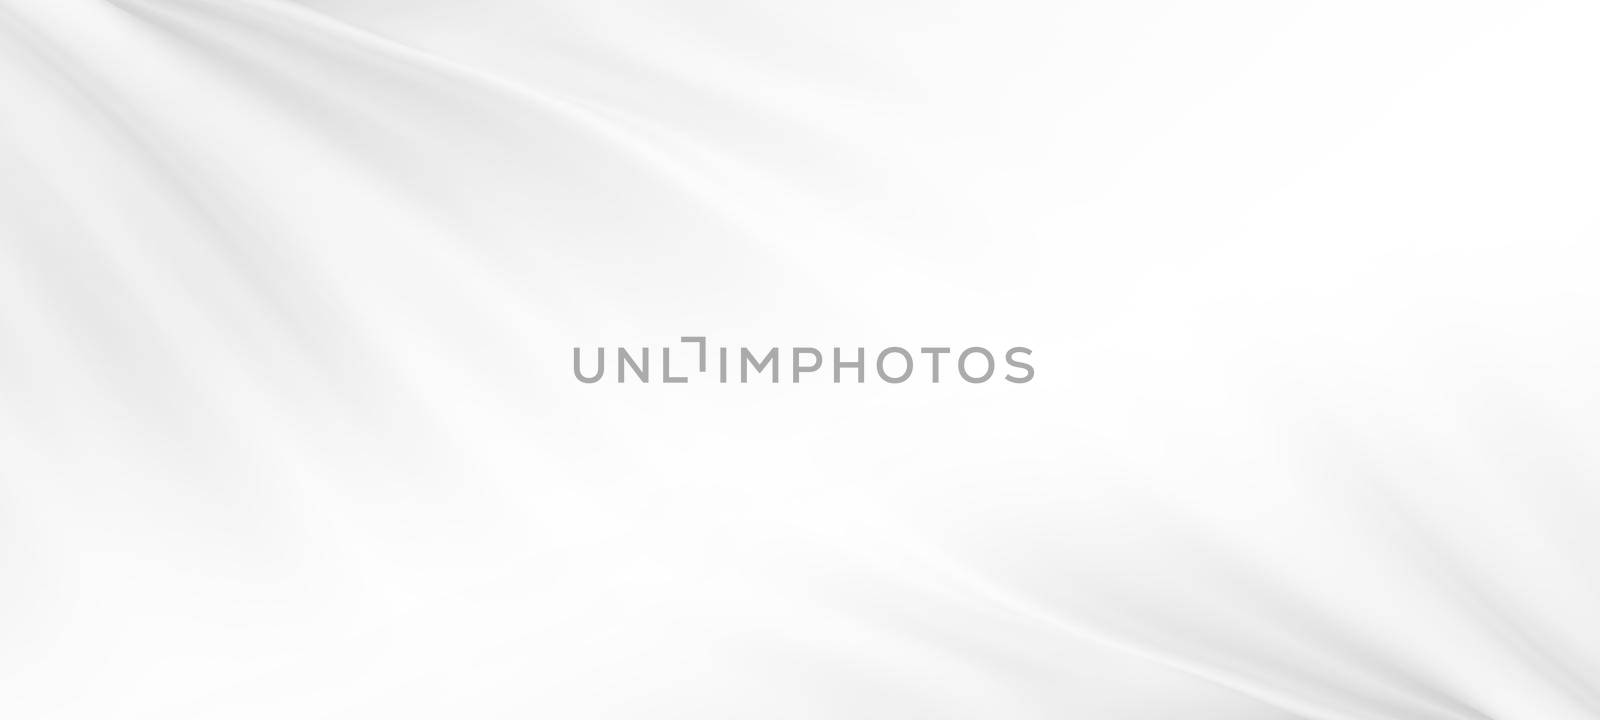 White luxury cloth background with copy space 3D render